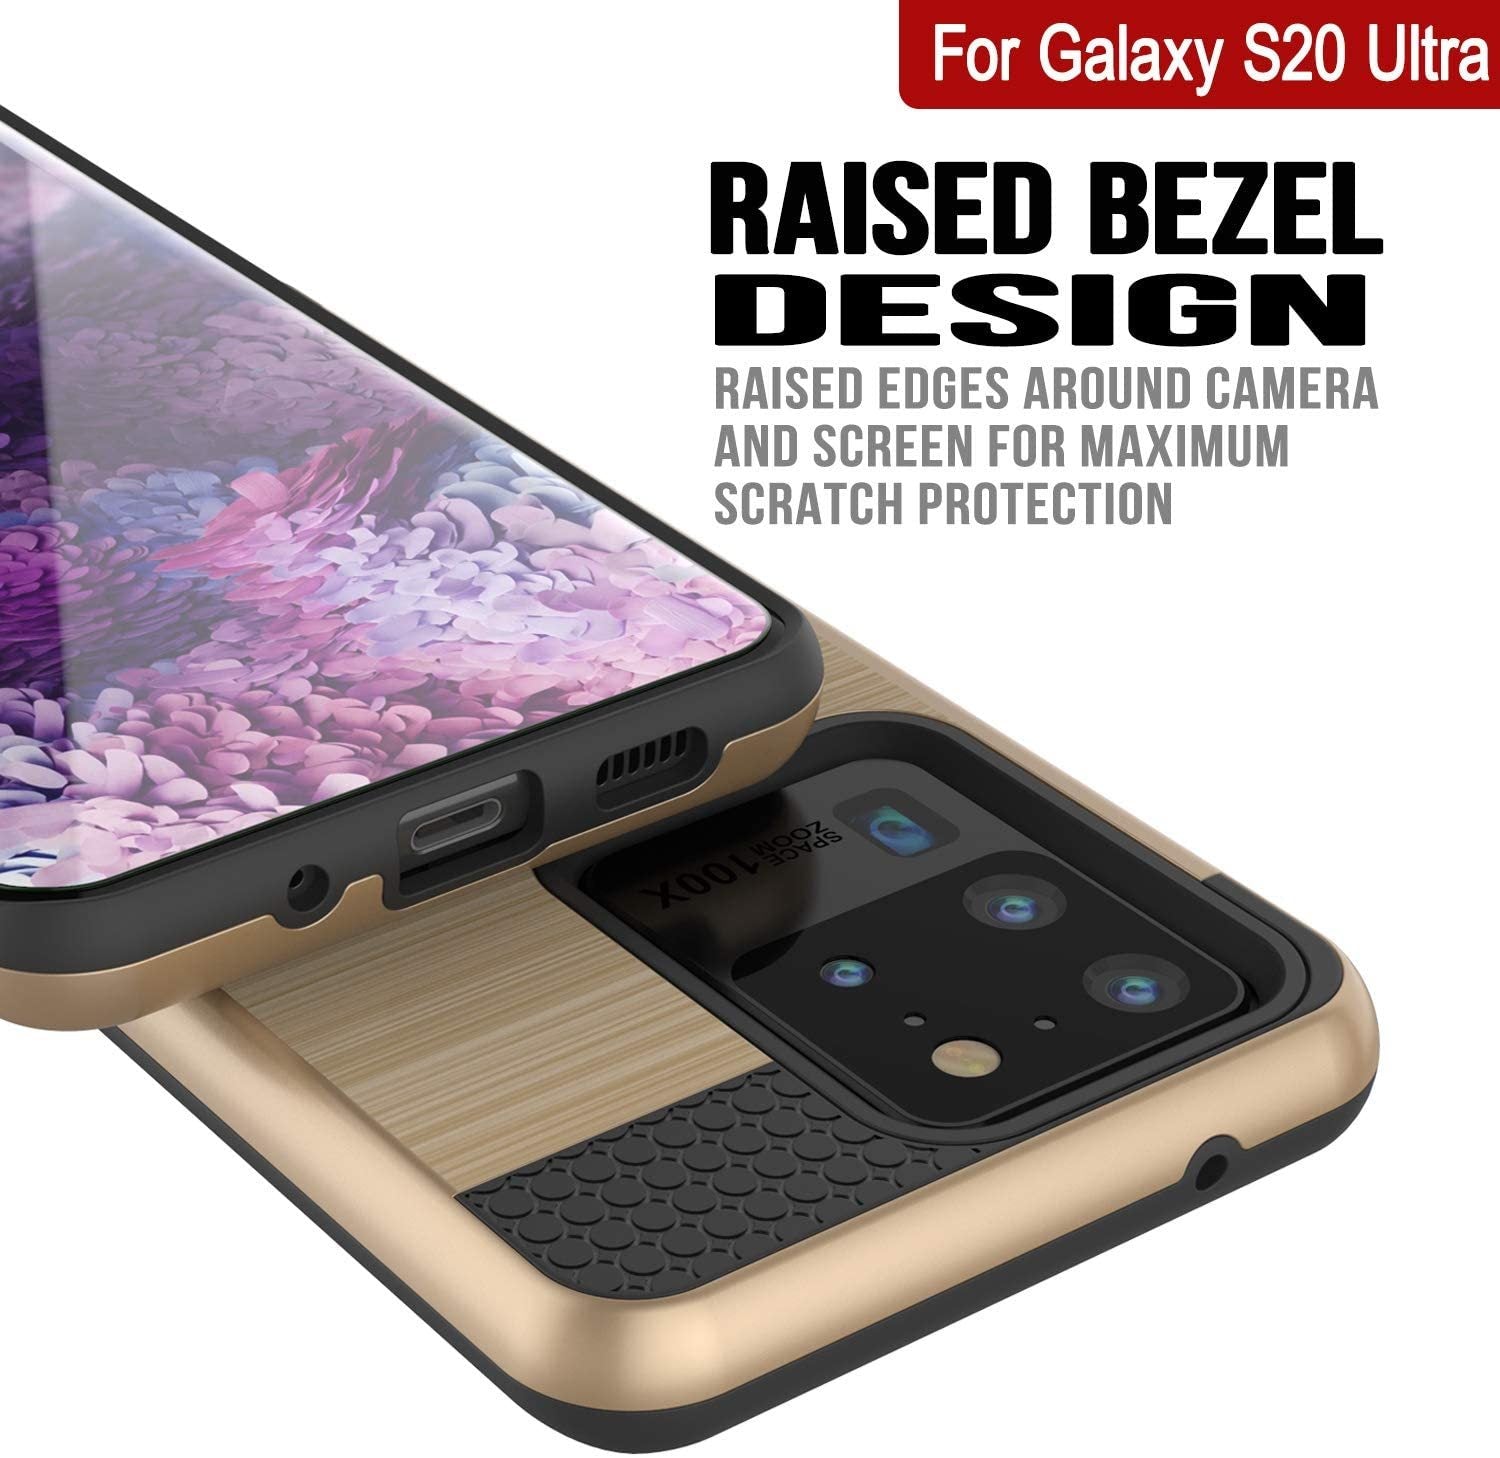 Galaxy S20 Ultra Case, PUNKcase [SLOT Series] [Slim Fit] Dual-Layer Armor Cover w/Integrated Anti-Shock System, Credit Card Slot [Gold]